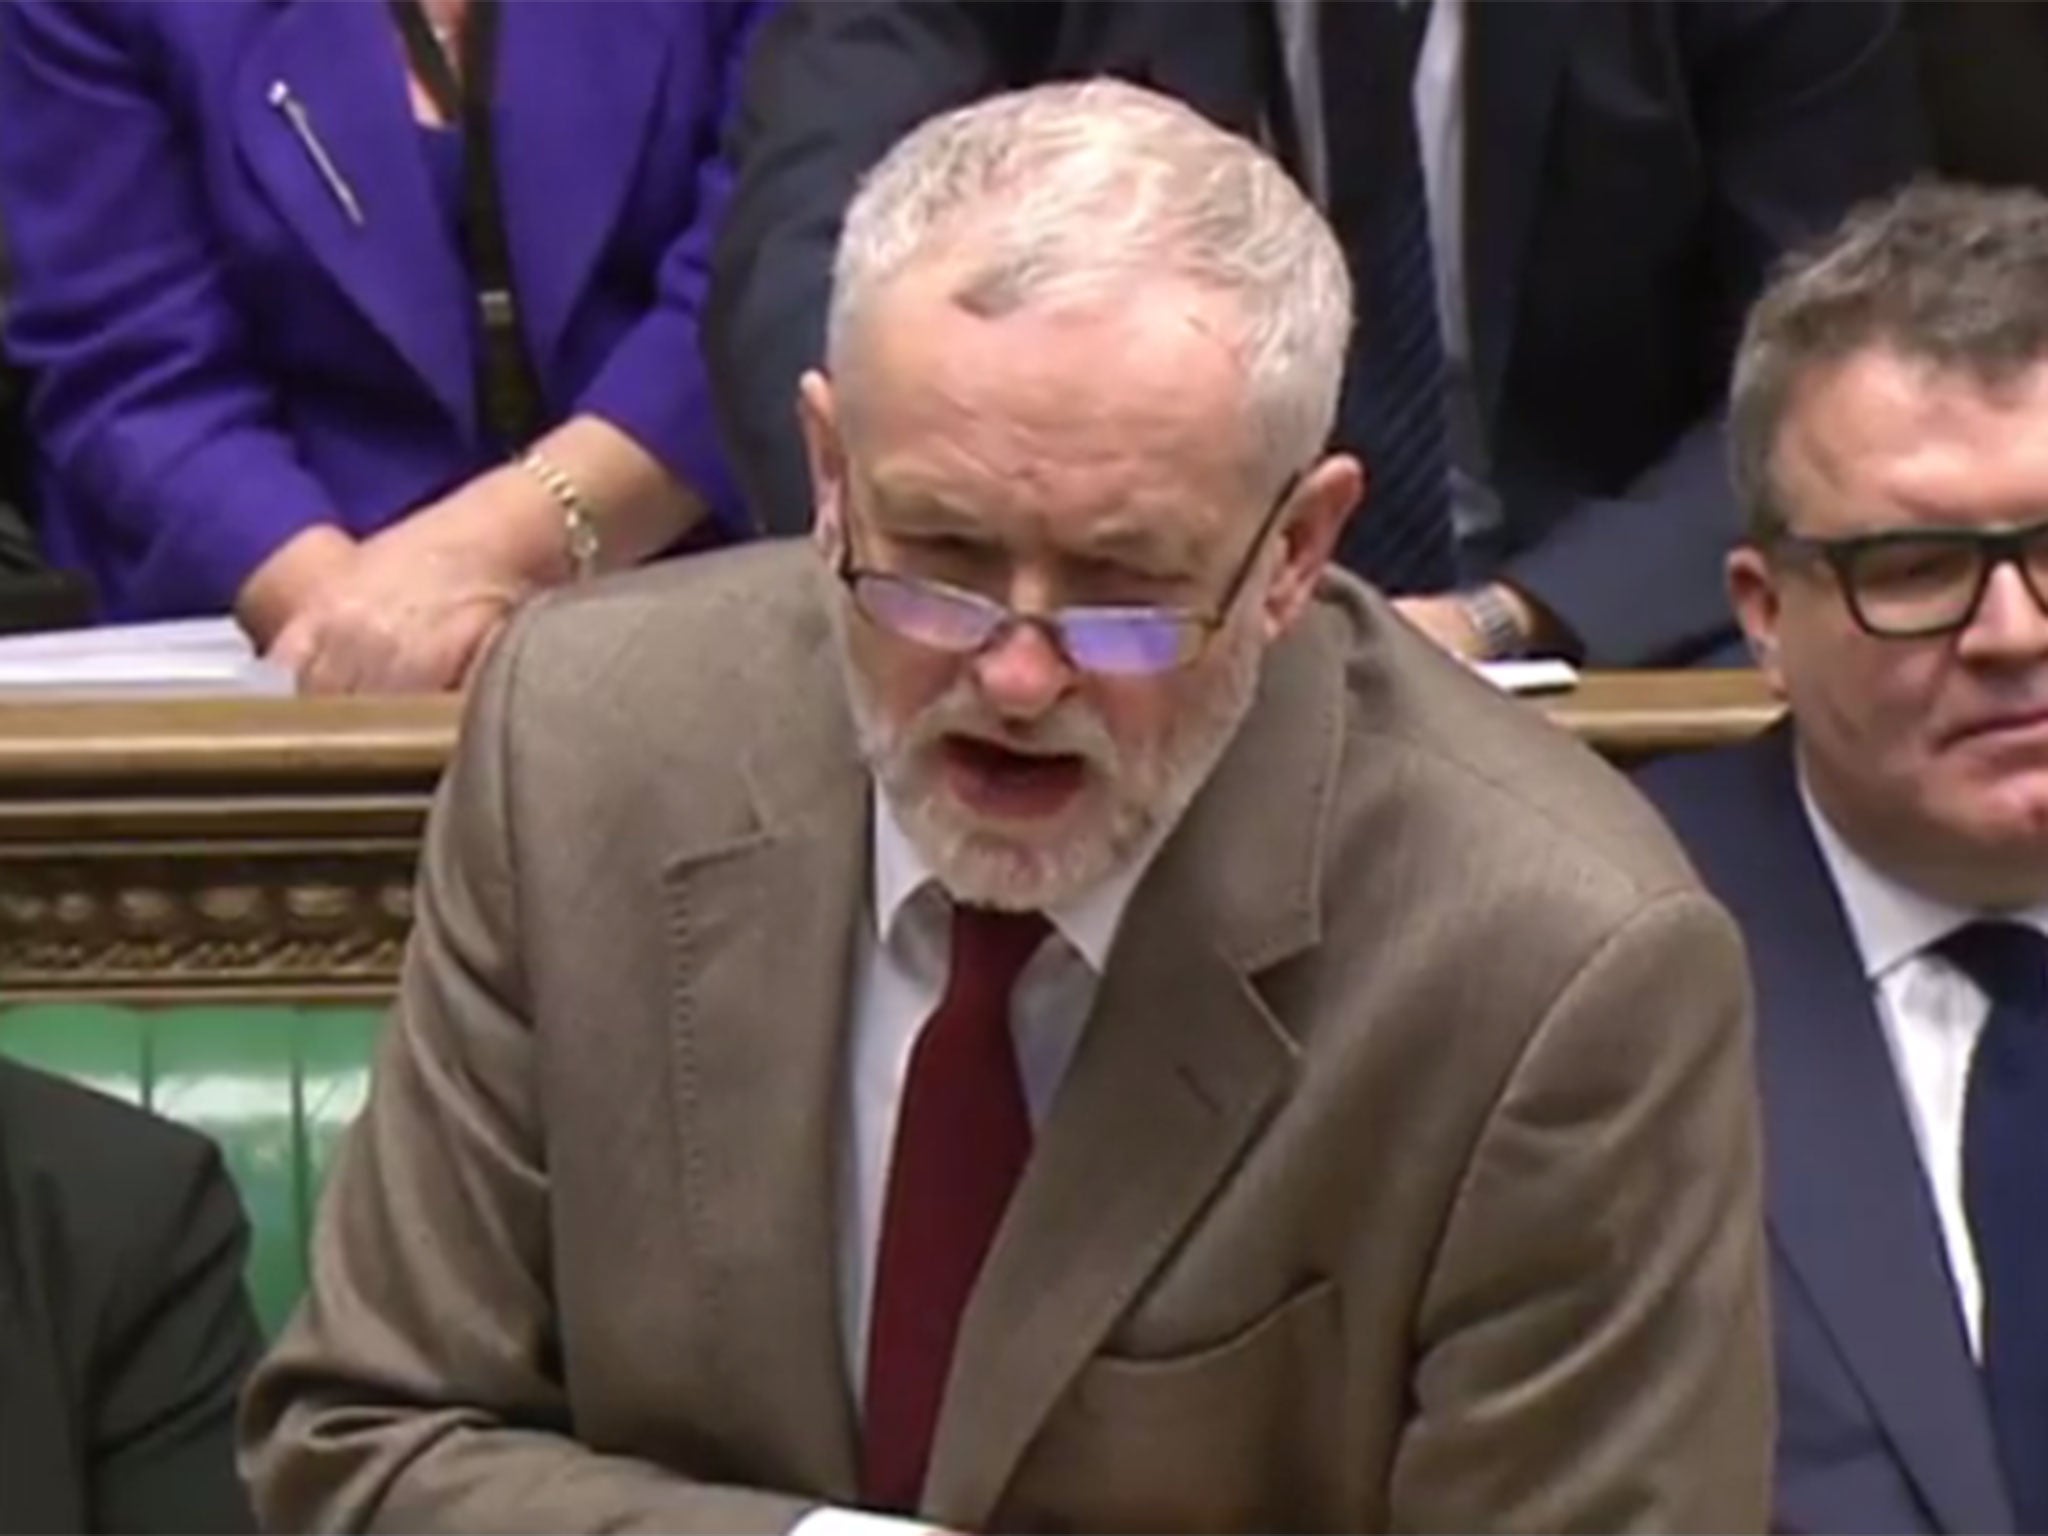 Labour leader Jeremy Corbyn has tried to reform PMQs